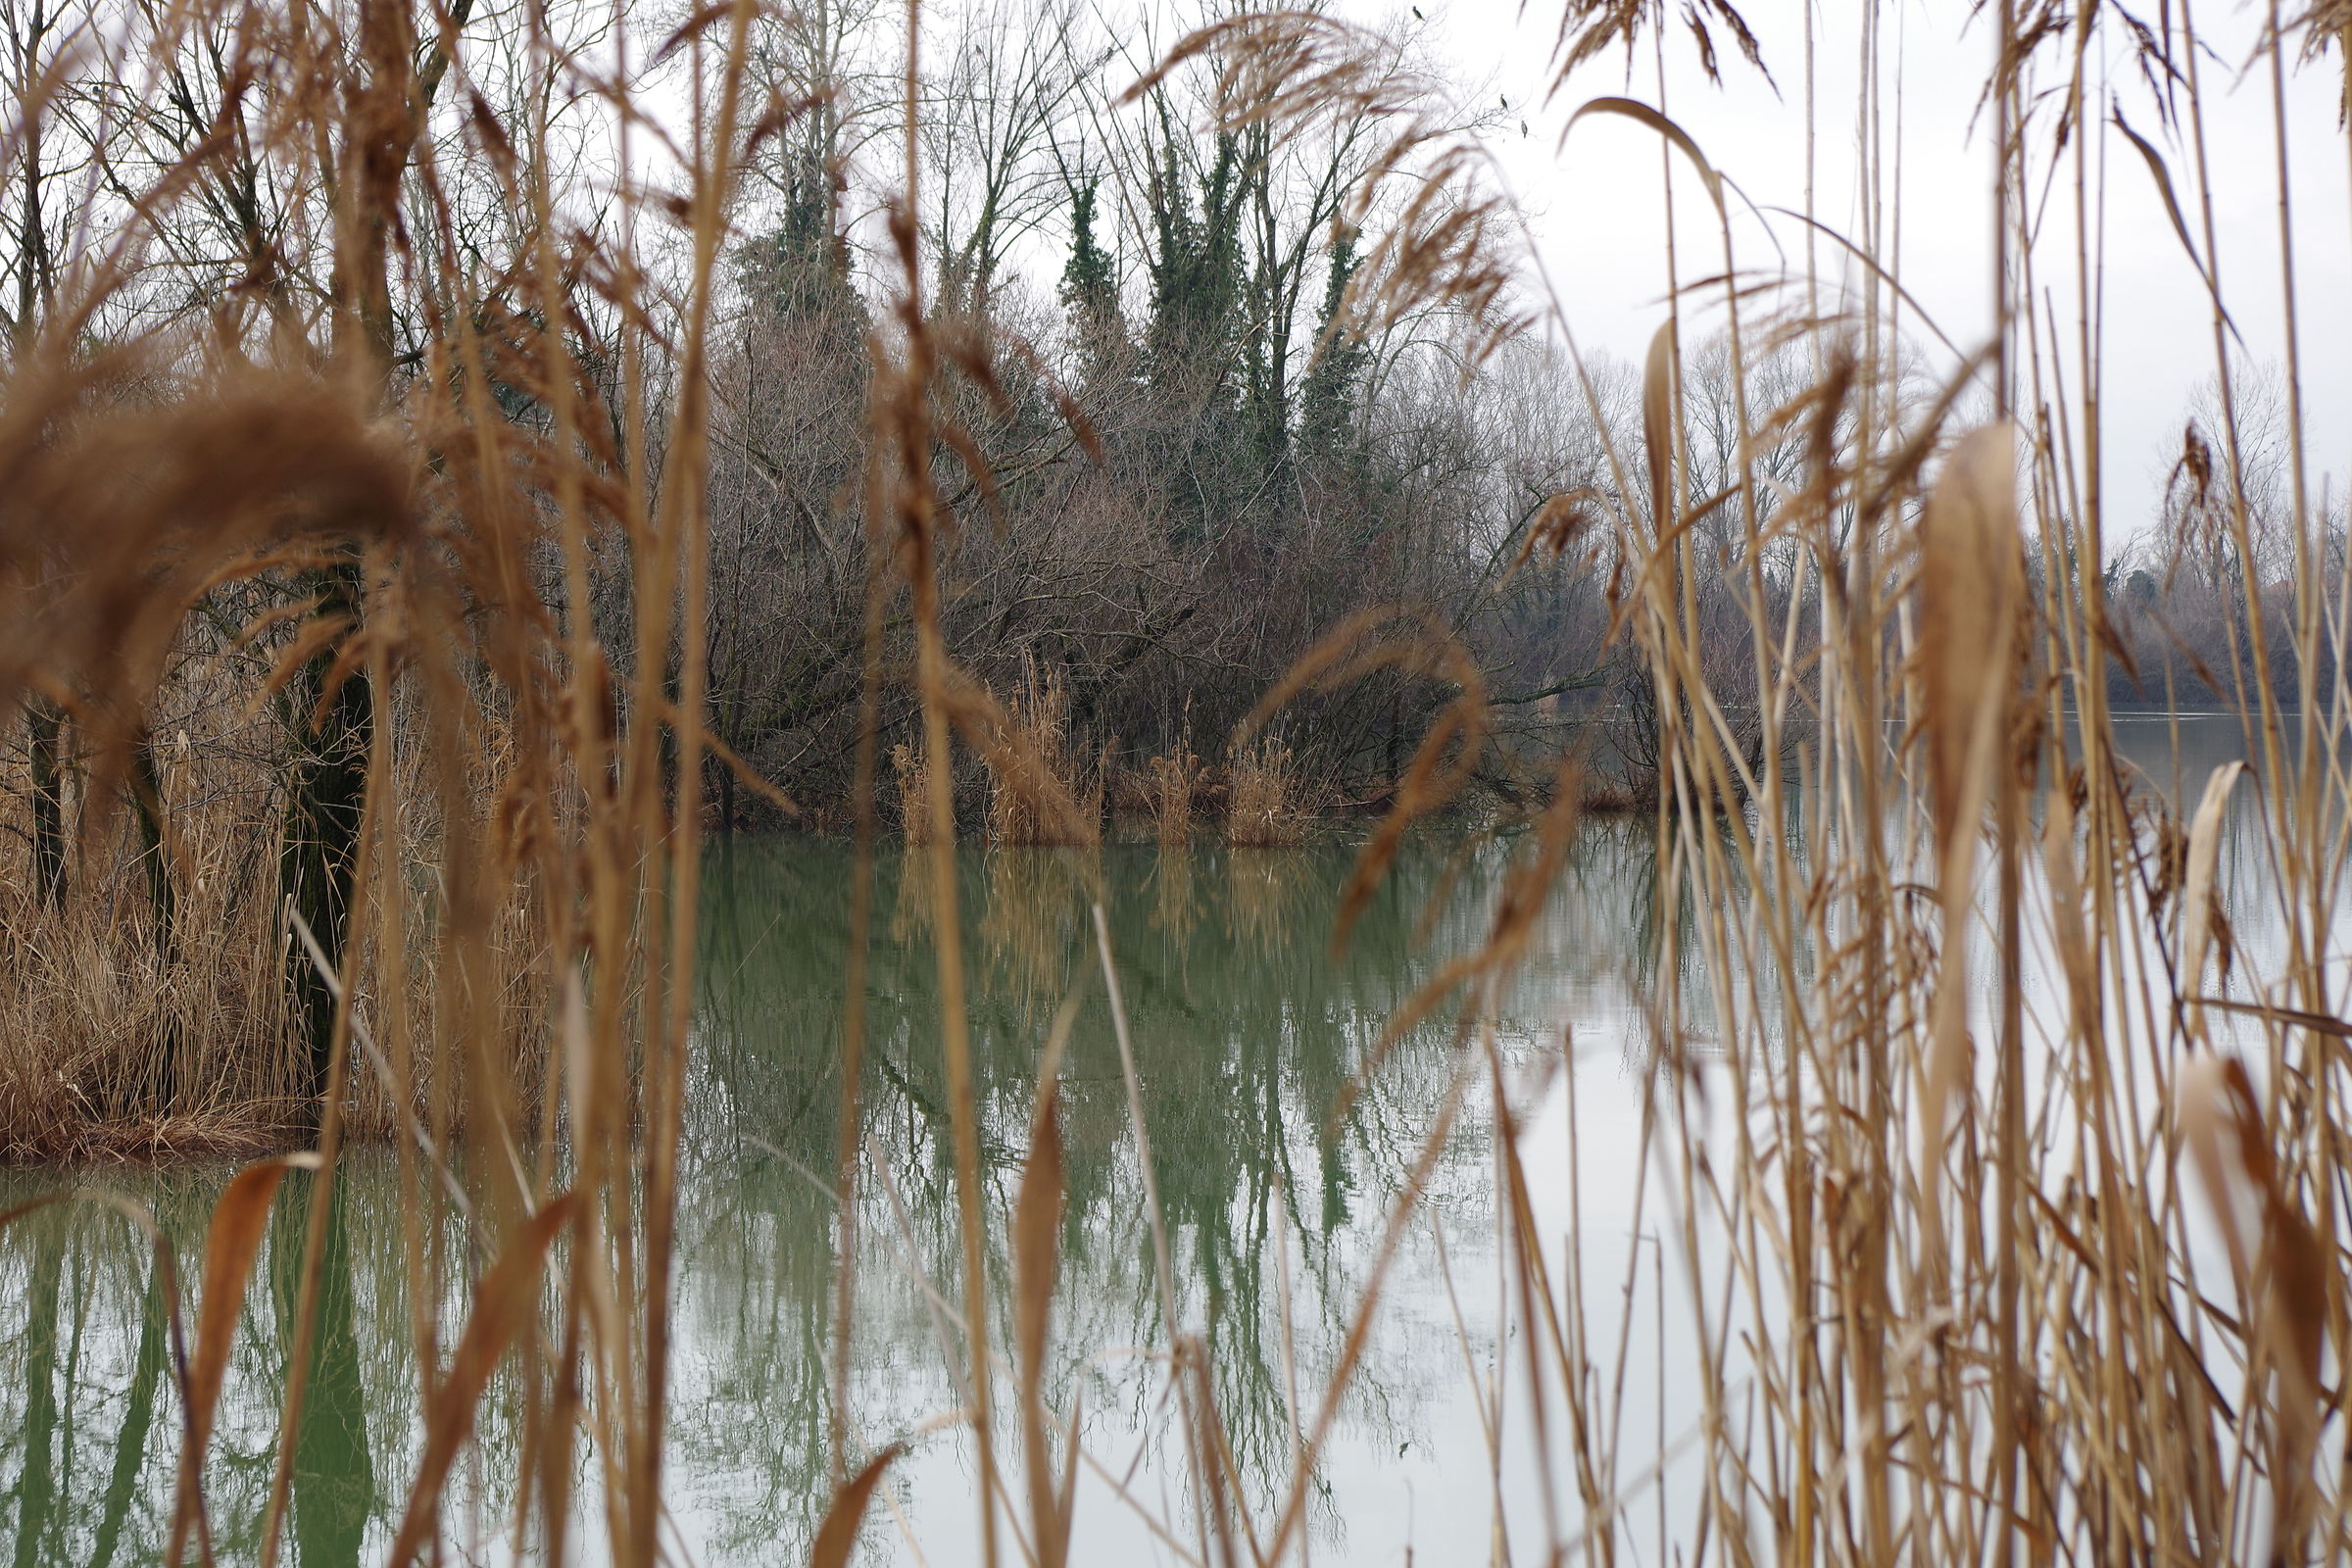 The lake beyond the reed beds...